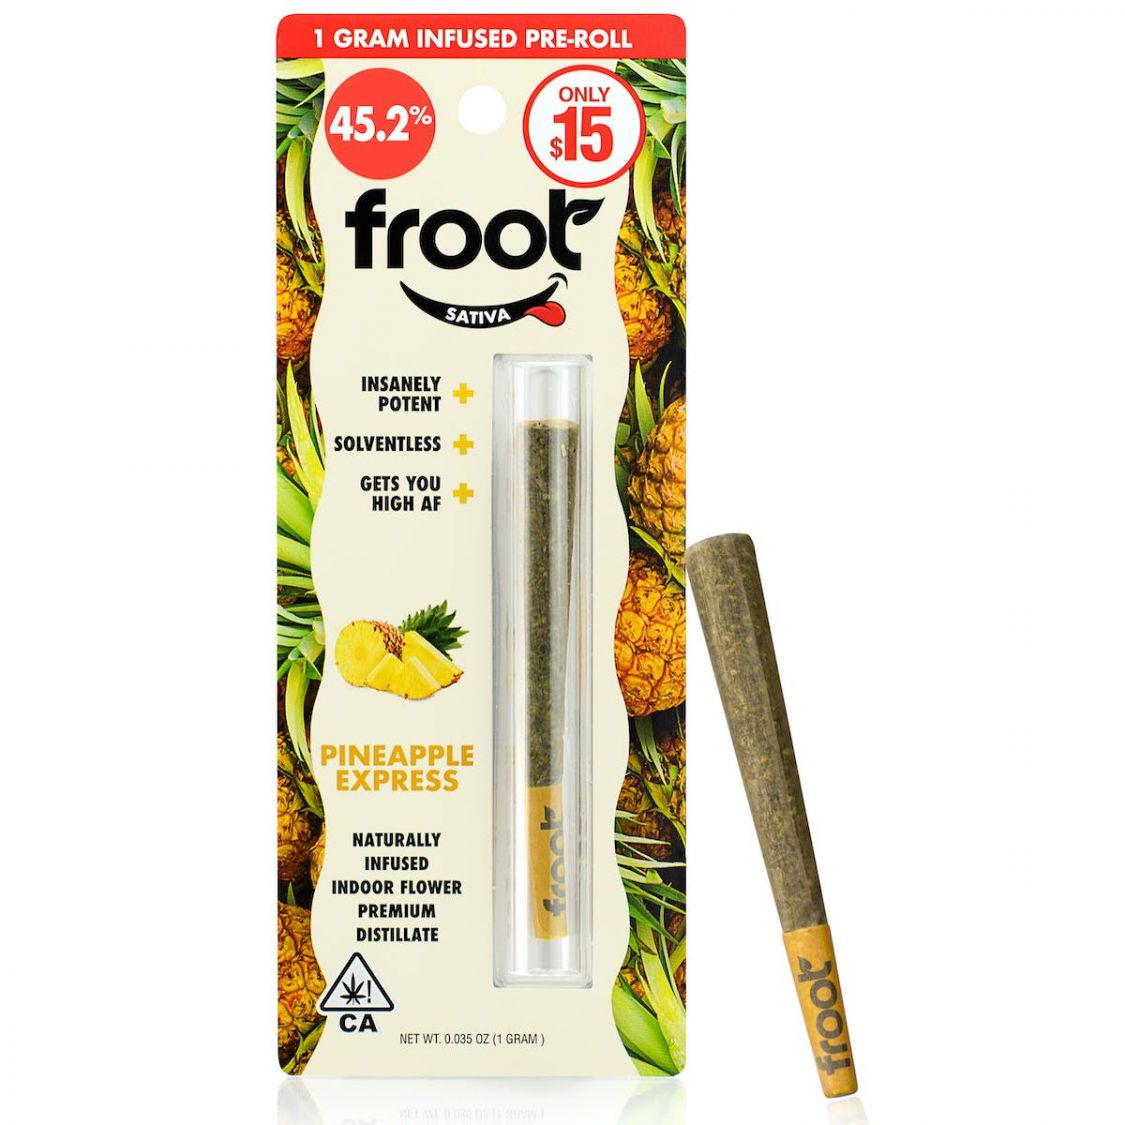 Froot Pineapple Express Infused Pre-Roll Pre-rolls Infused Pre-Rolls